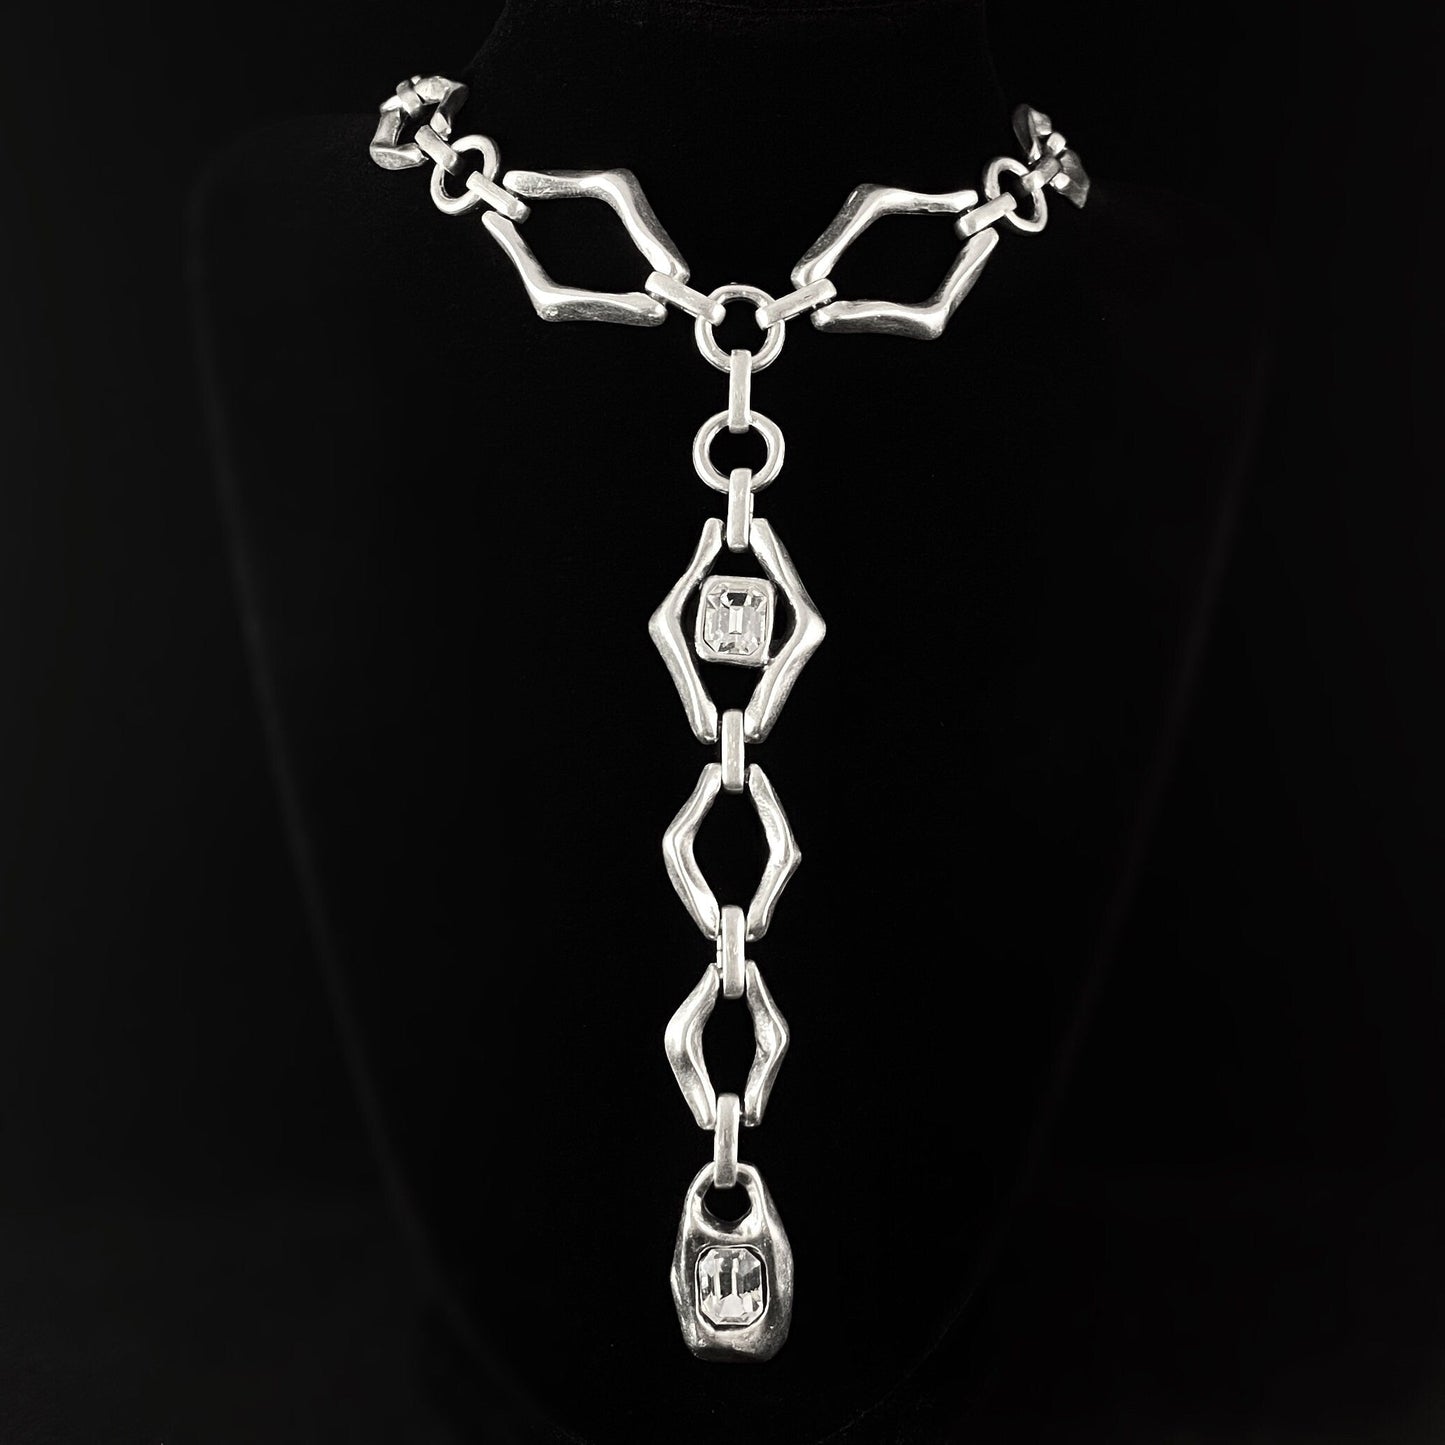 Long Silver Chunky Chain Link Lariat Necklace with Clear Crystals, Handmade, Nickel Free